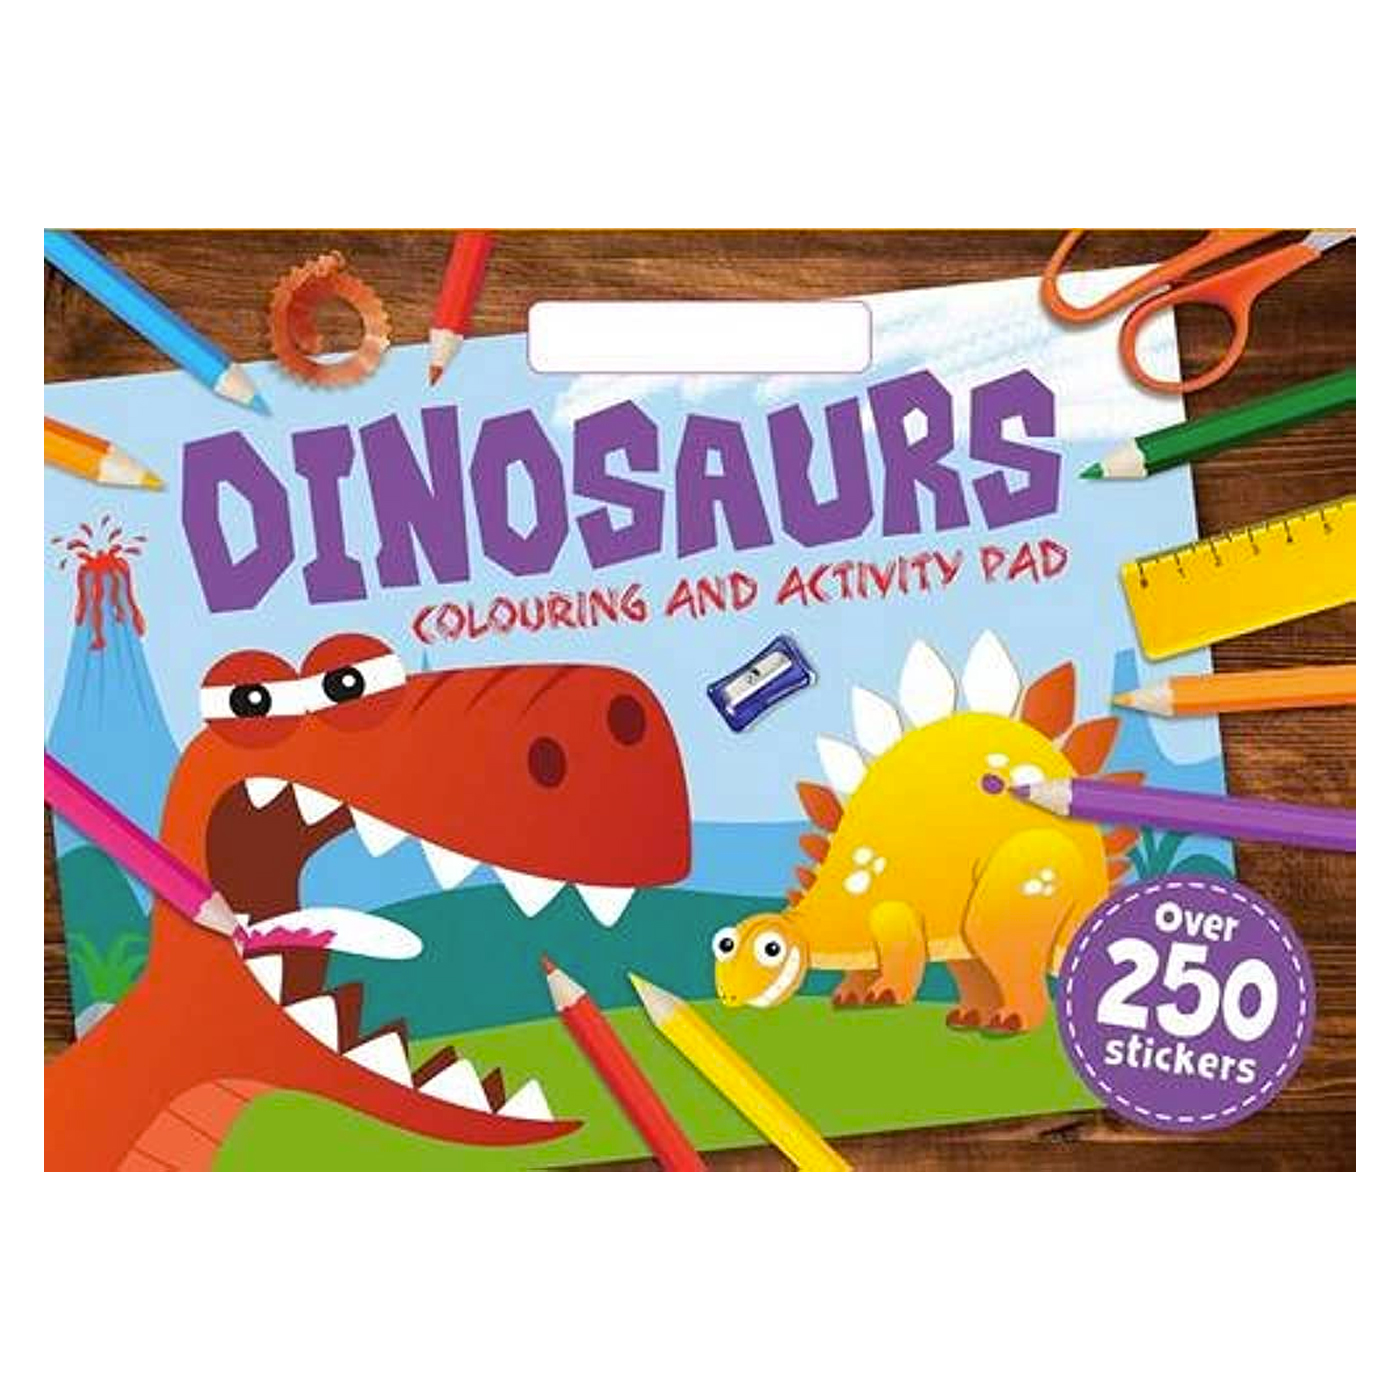 IGLOO Dinosaurs Colouring and Activity Pad